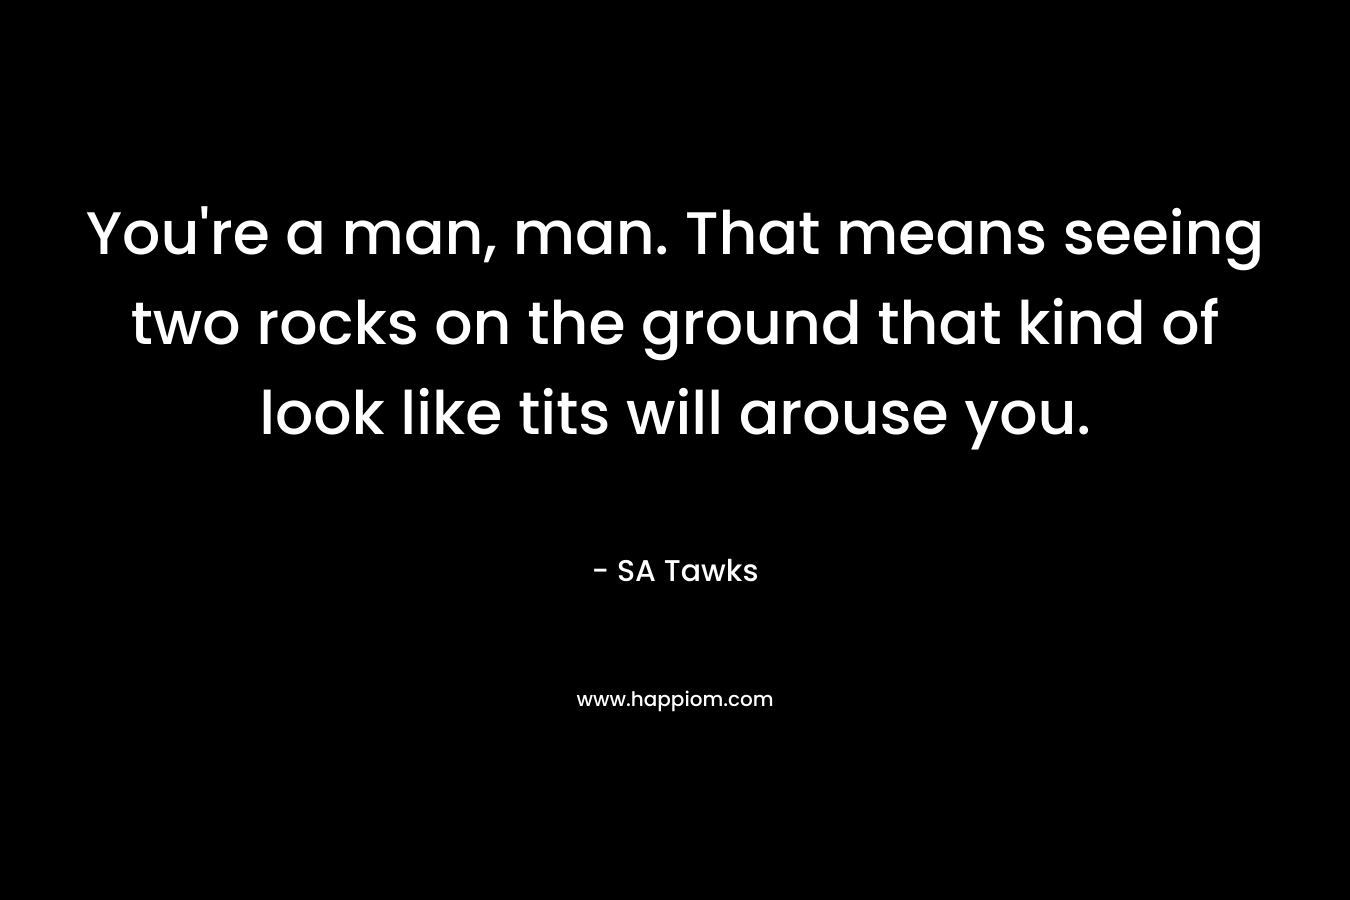 You’re a man, man. That means seeing two rocks on the ground that kind of look like tits will arouse you. – SA Tawks